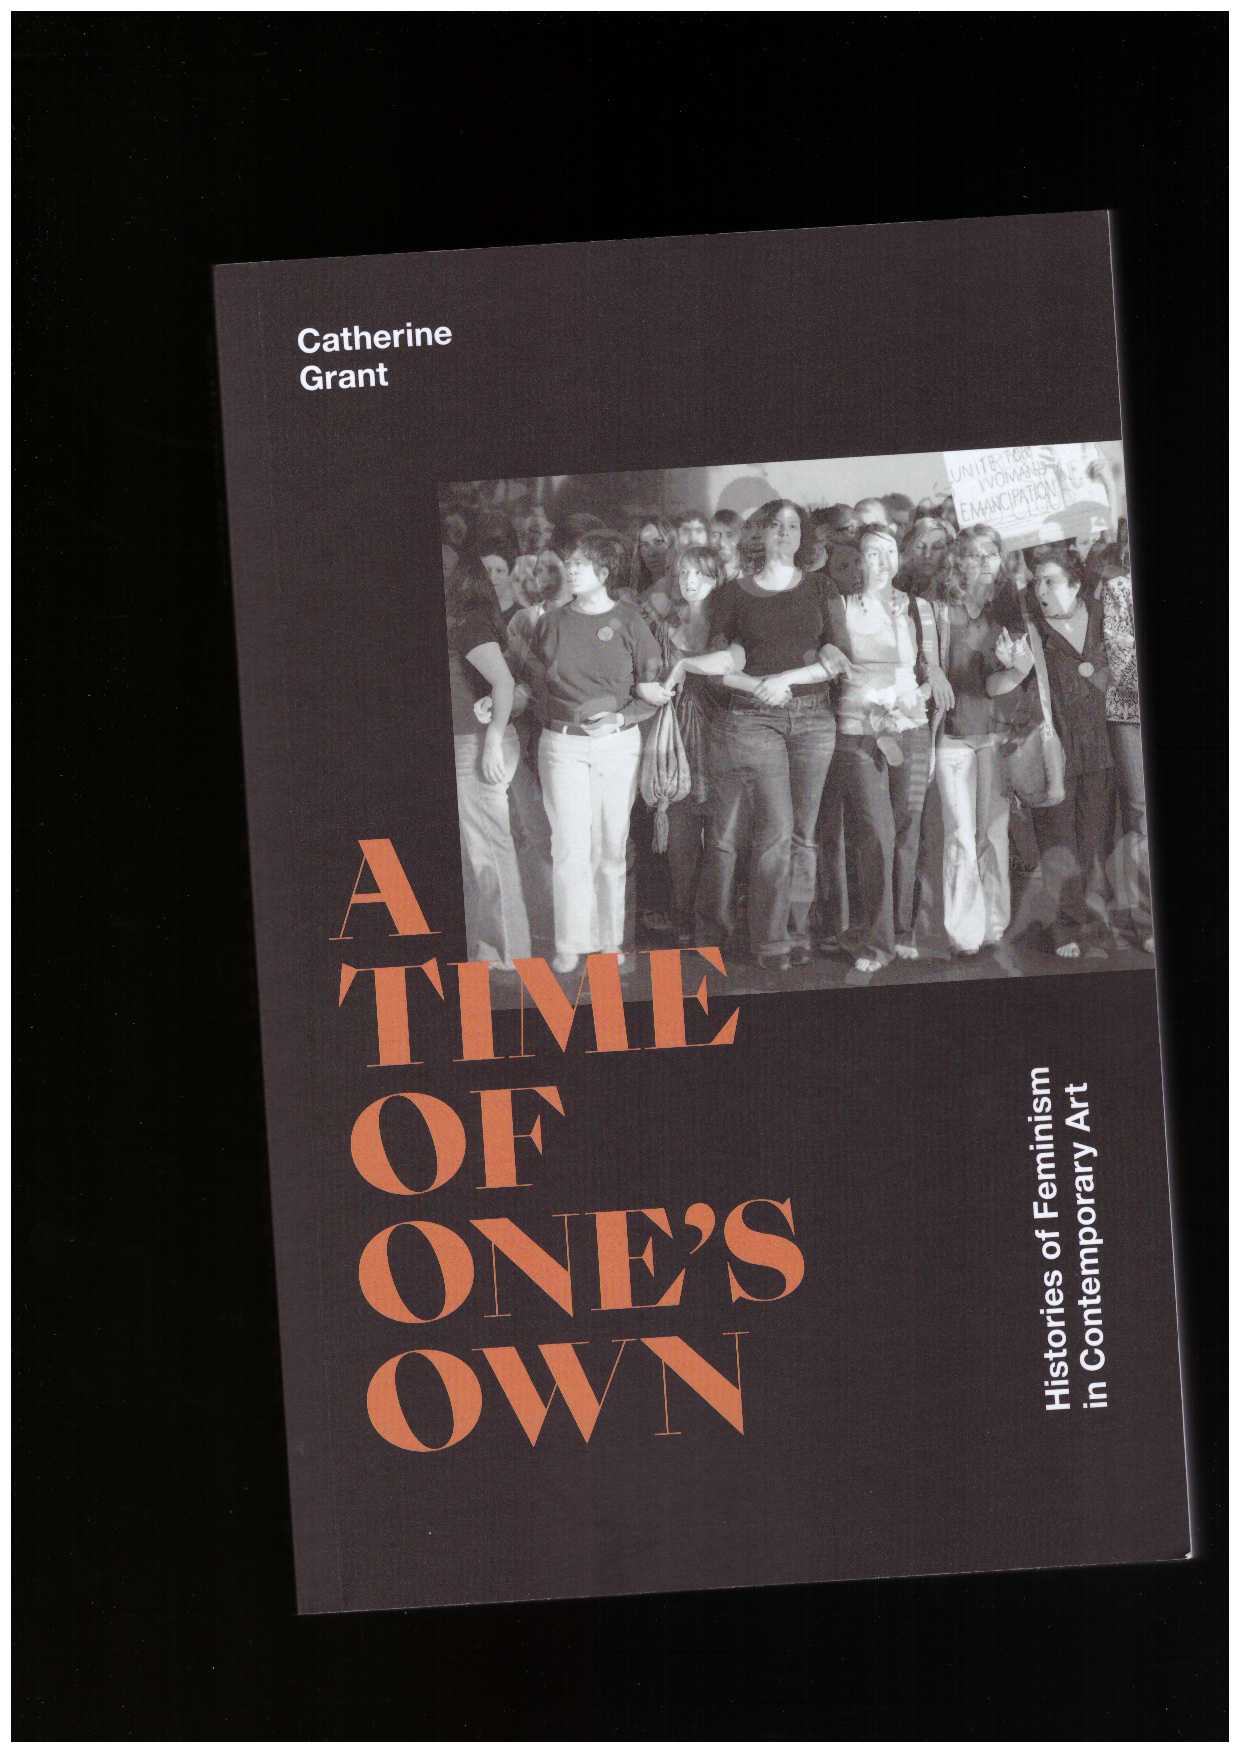 GRANT, Catherine - A Time of One′s Own. Histories of Feminism in Contemporary Art